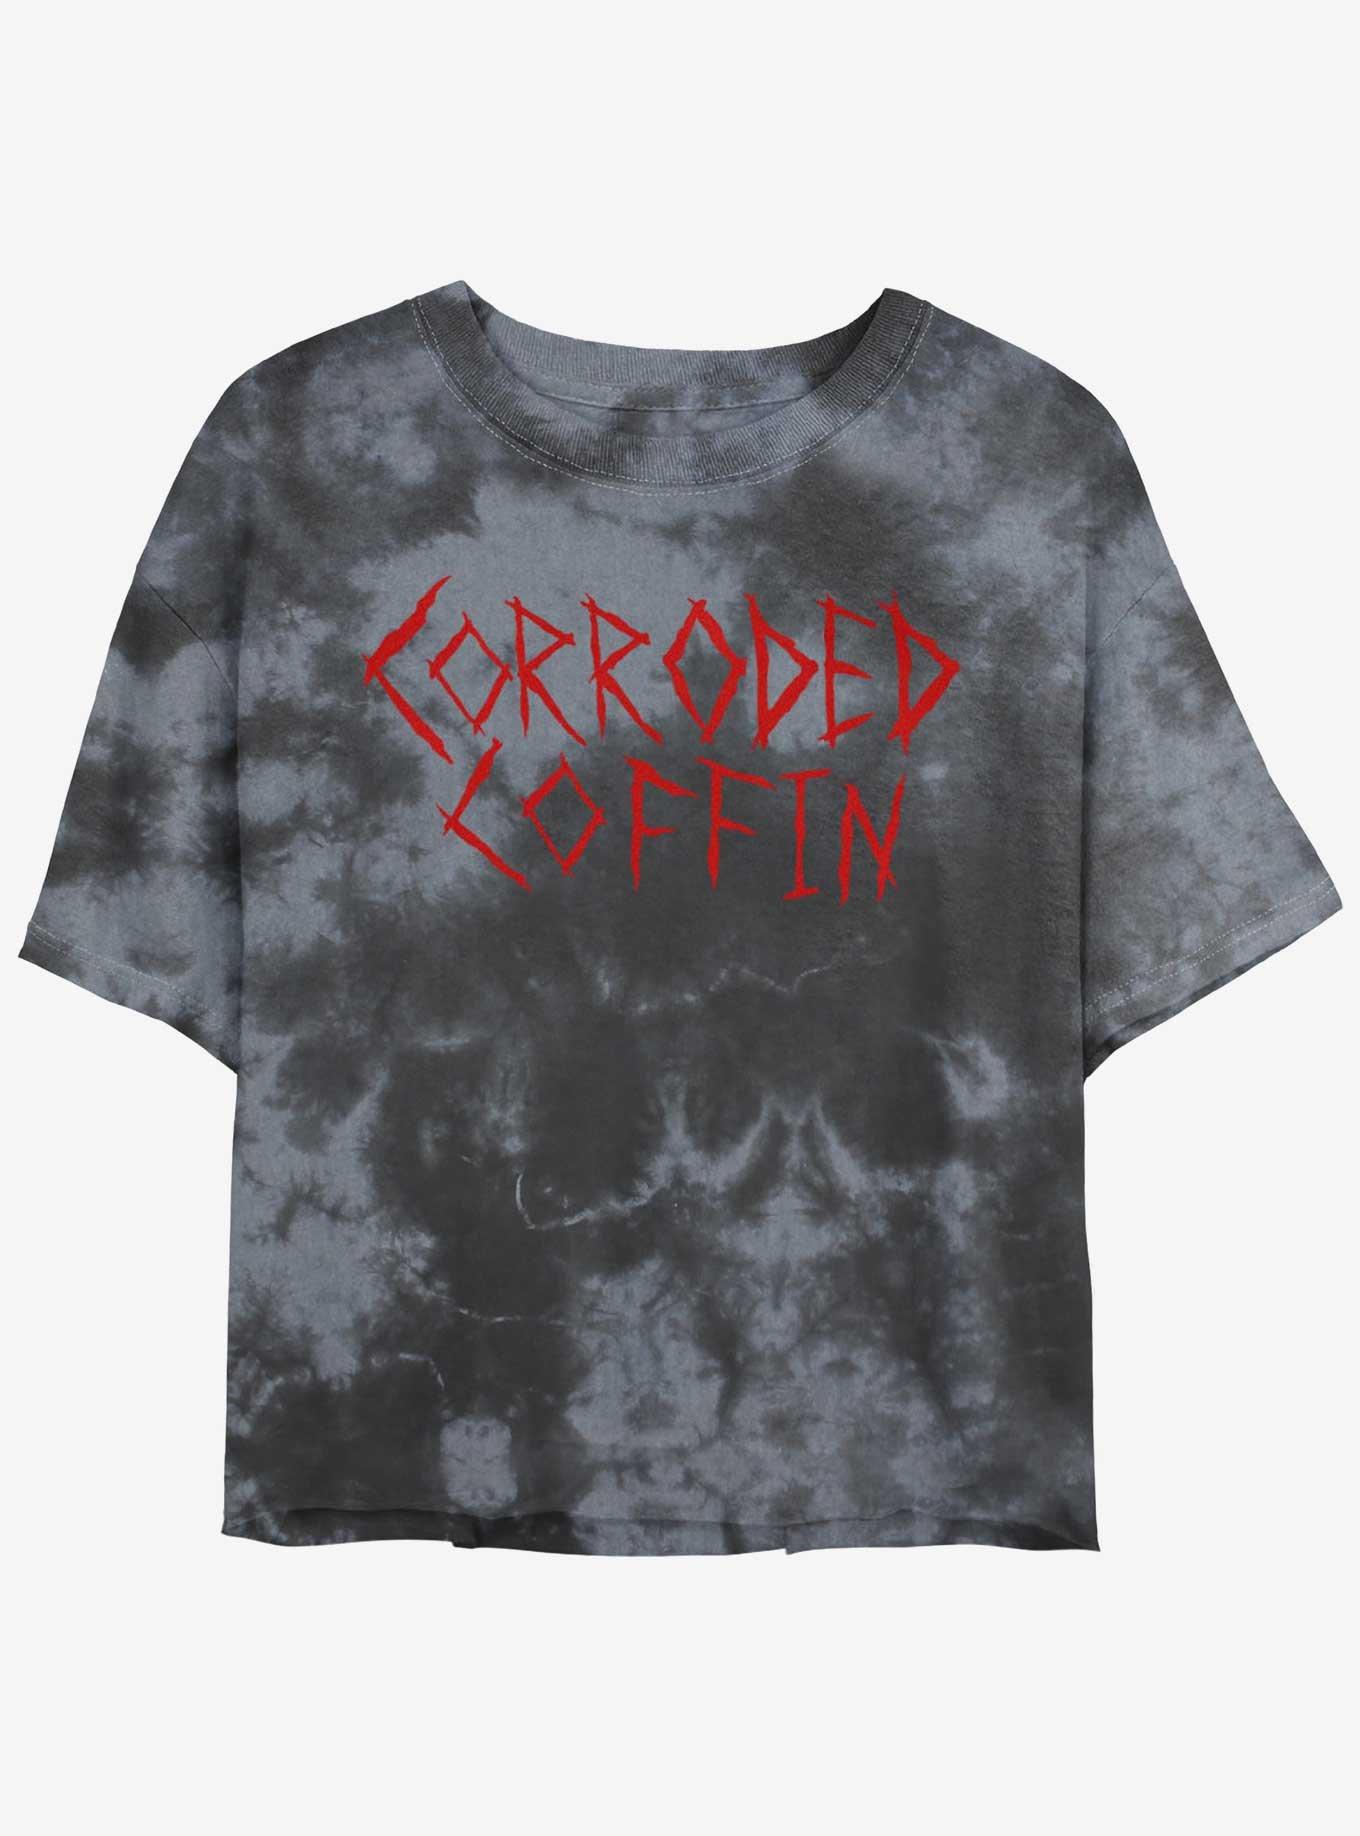 Stranger Things Corroded Coffin Mineral Wash Crop Girls T-Shirt, BLKCHAR, hi-res